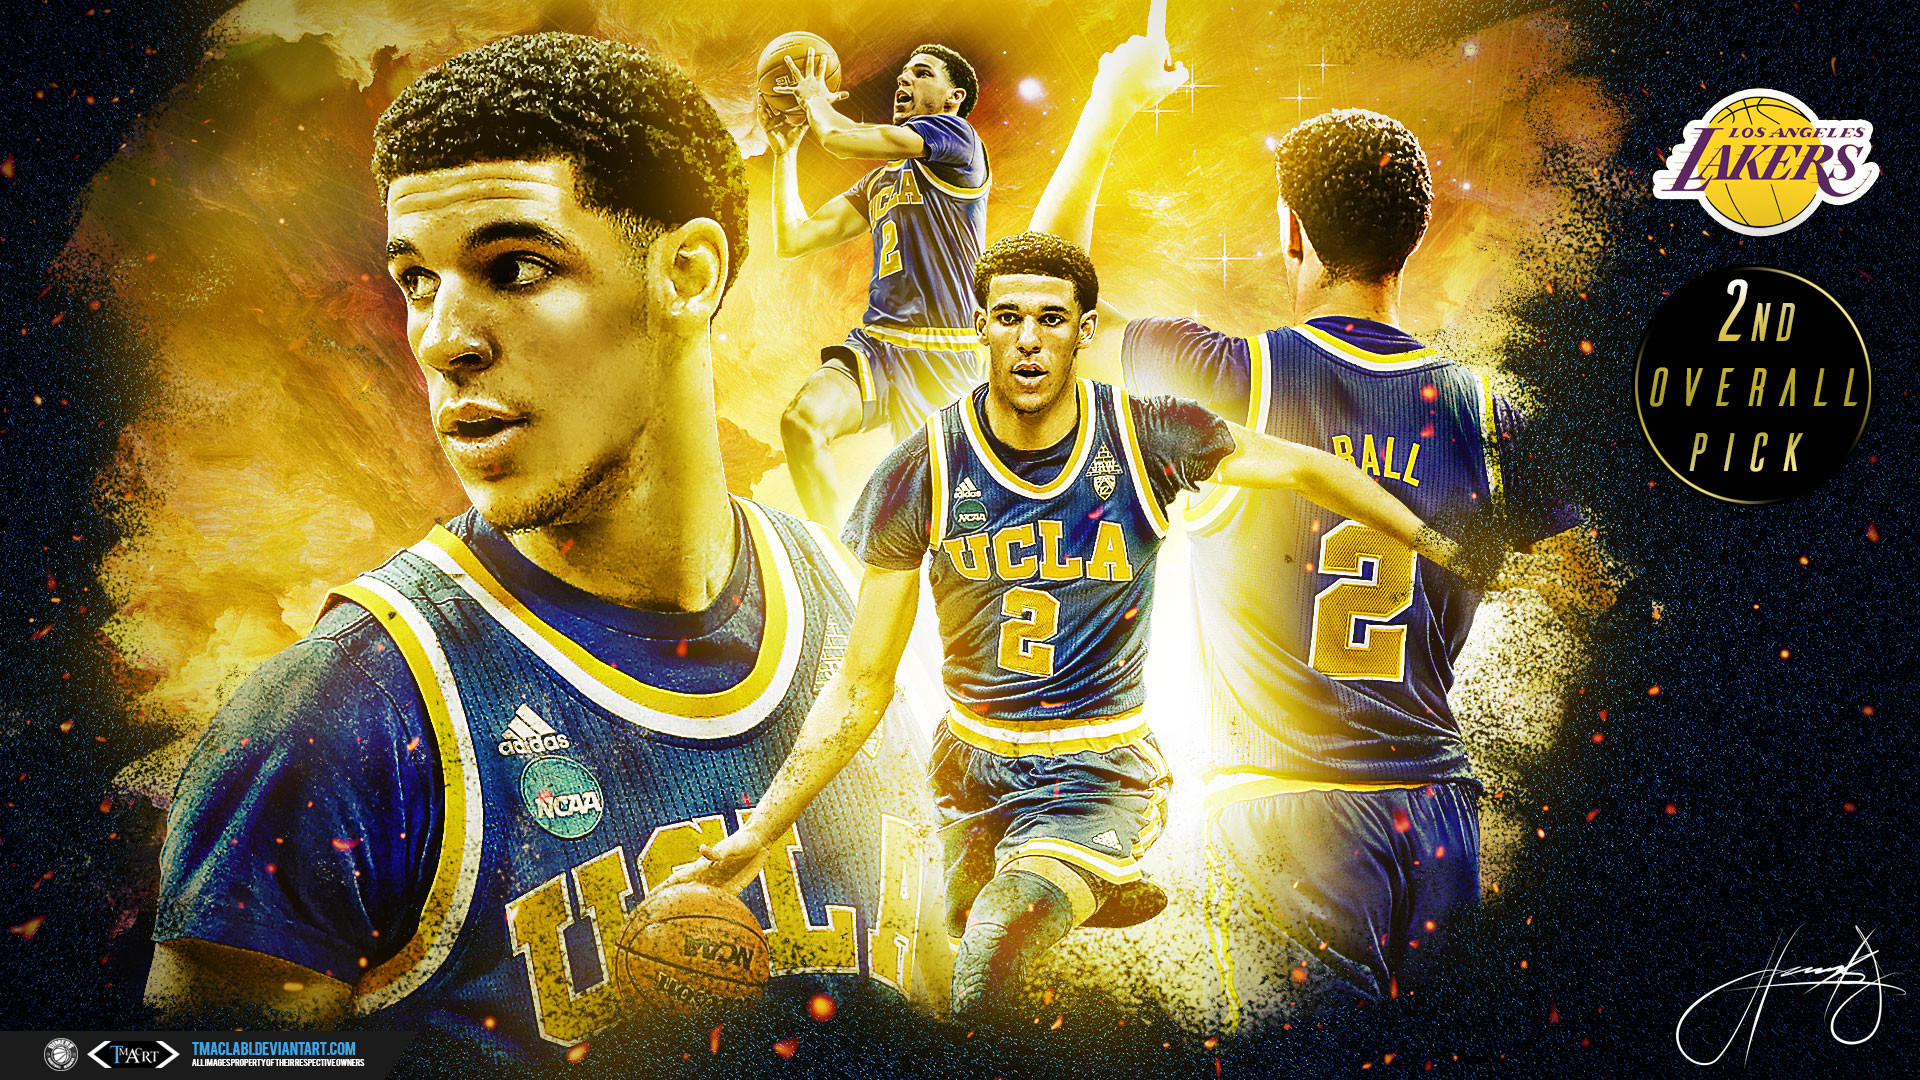 Lakers Wallpaper Pictures